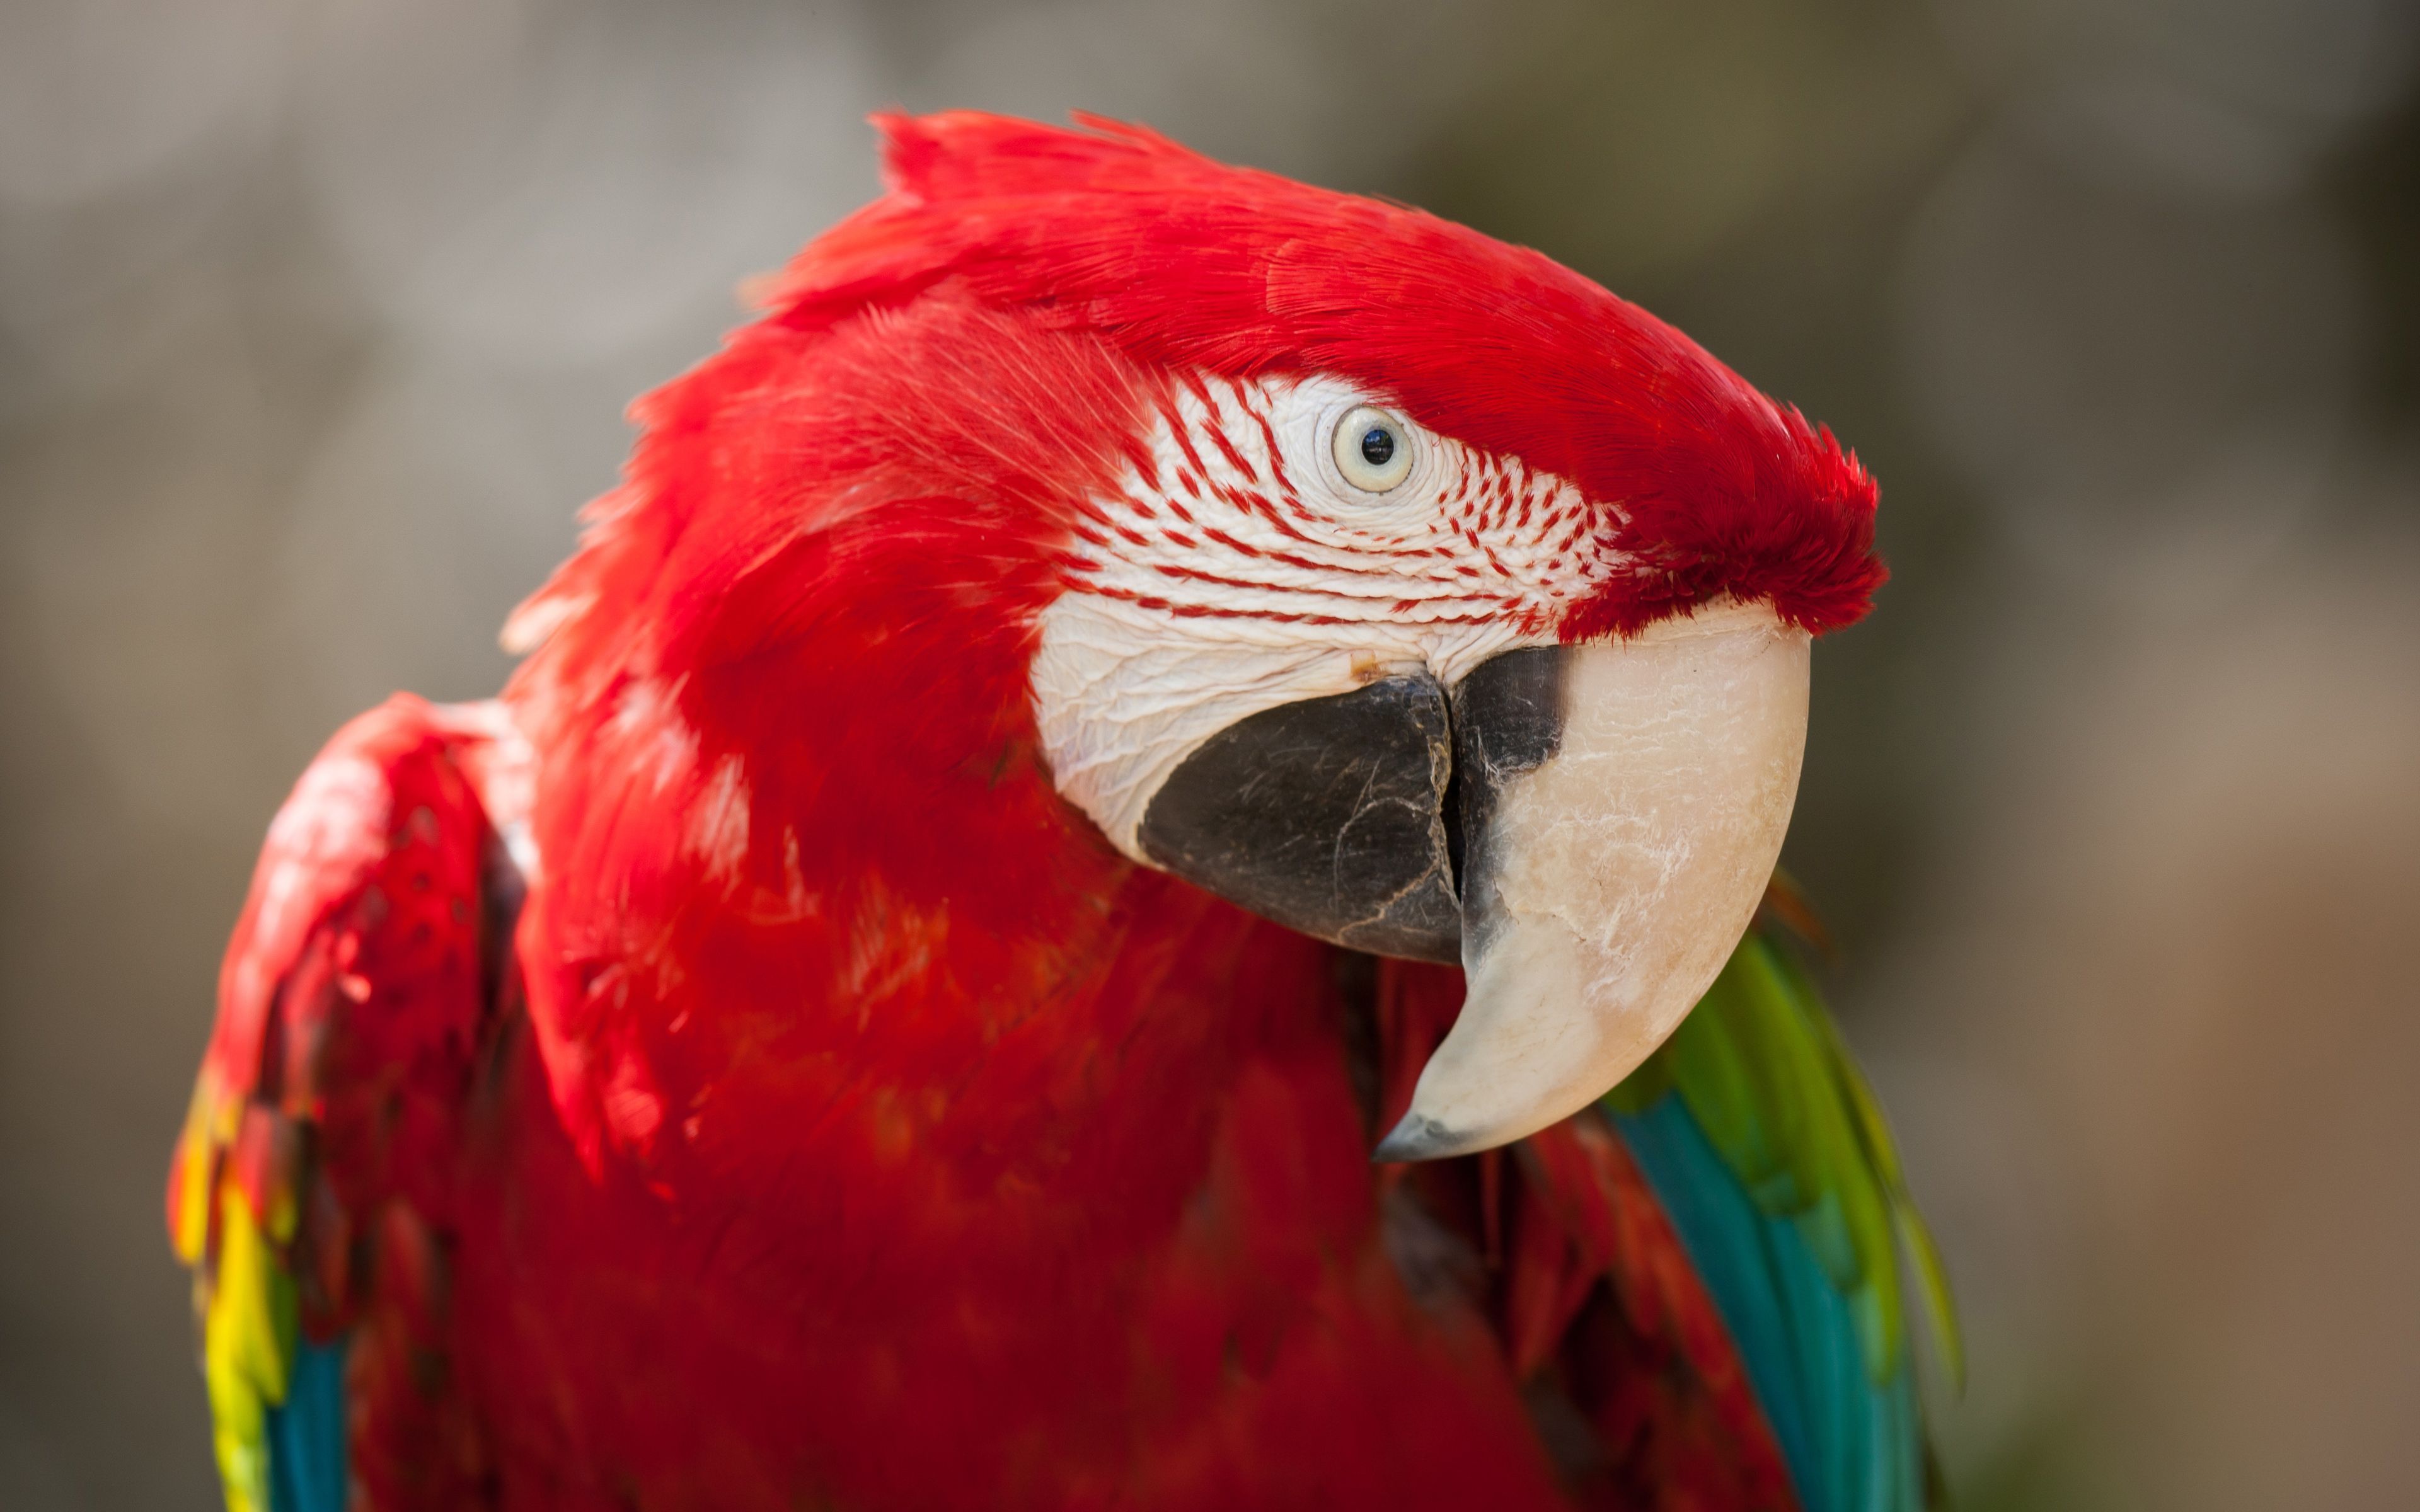 Macaw 4K wallpaper for your desktop or mobile screen free and easy to download